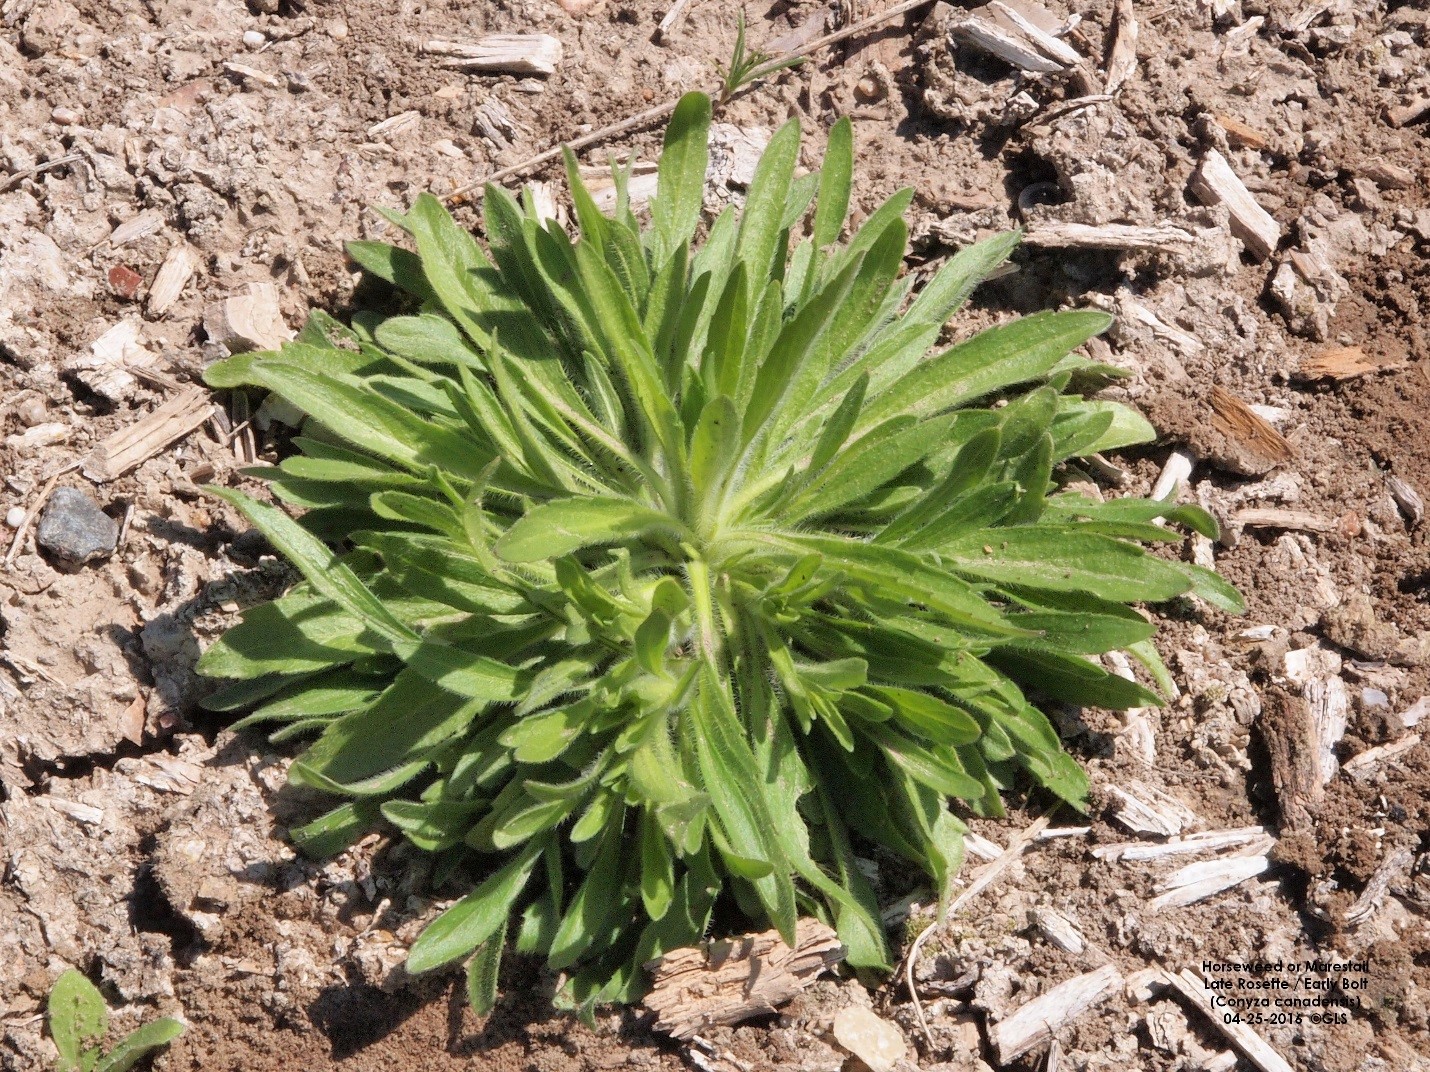 Marestail / Horseweed   